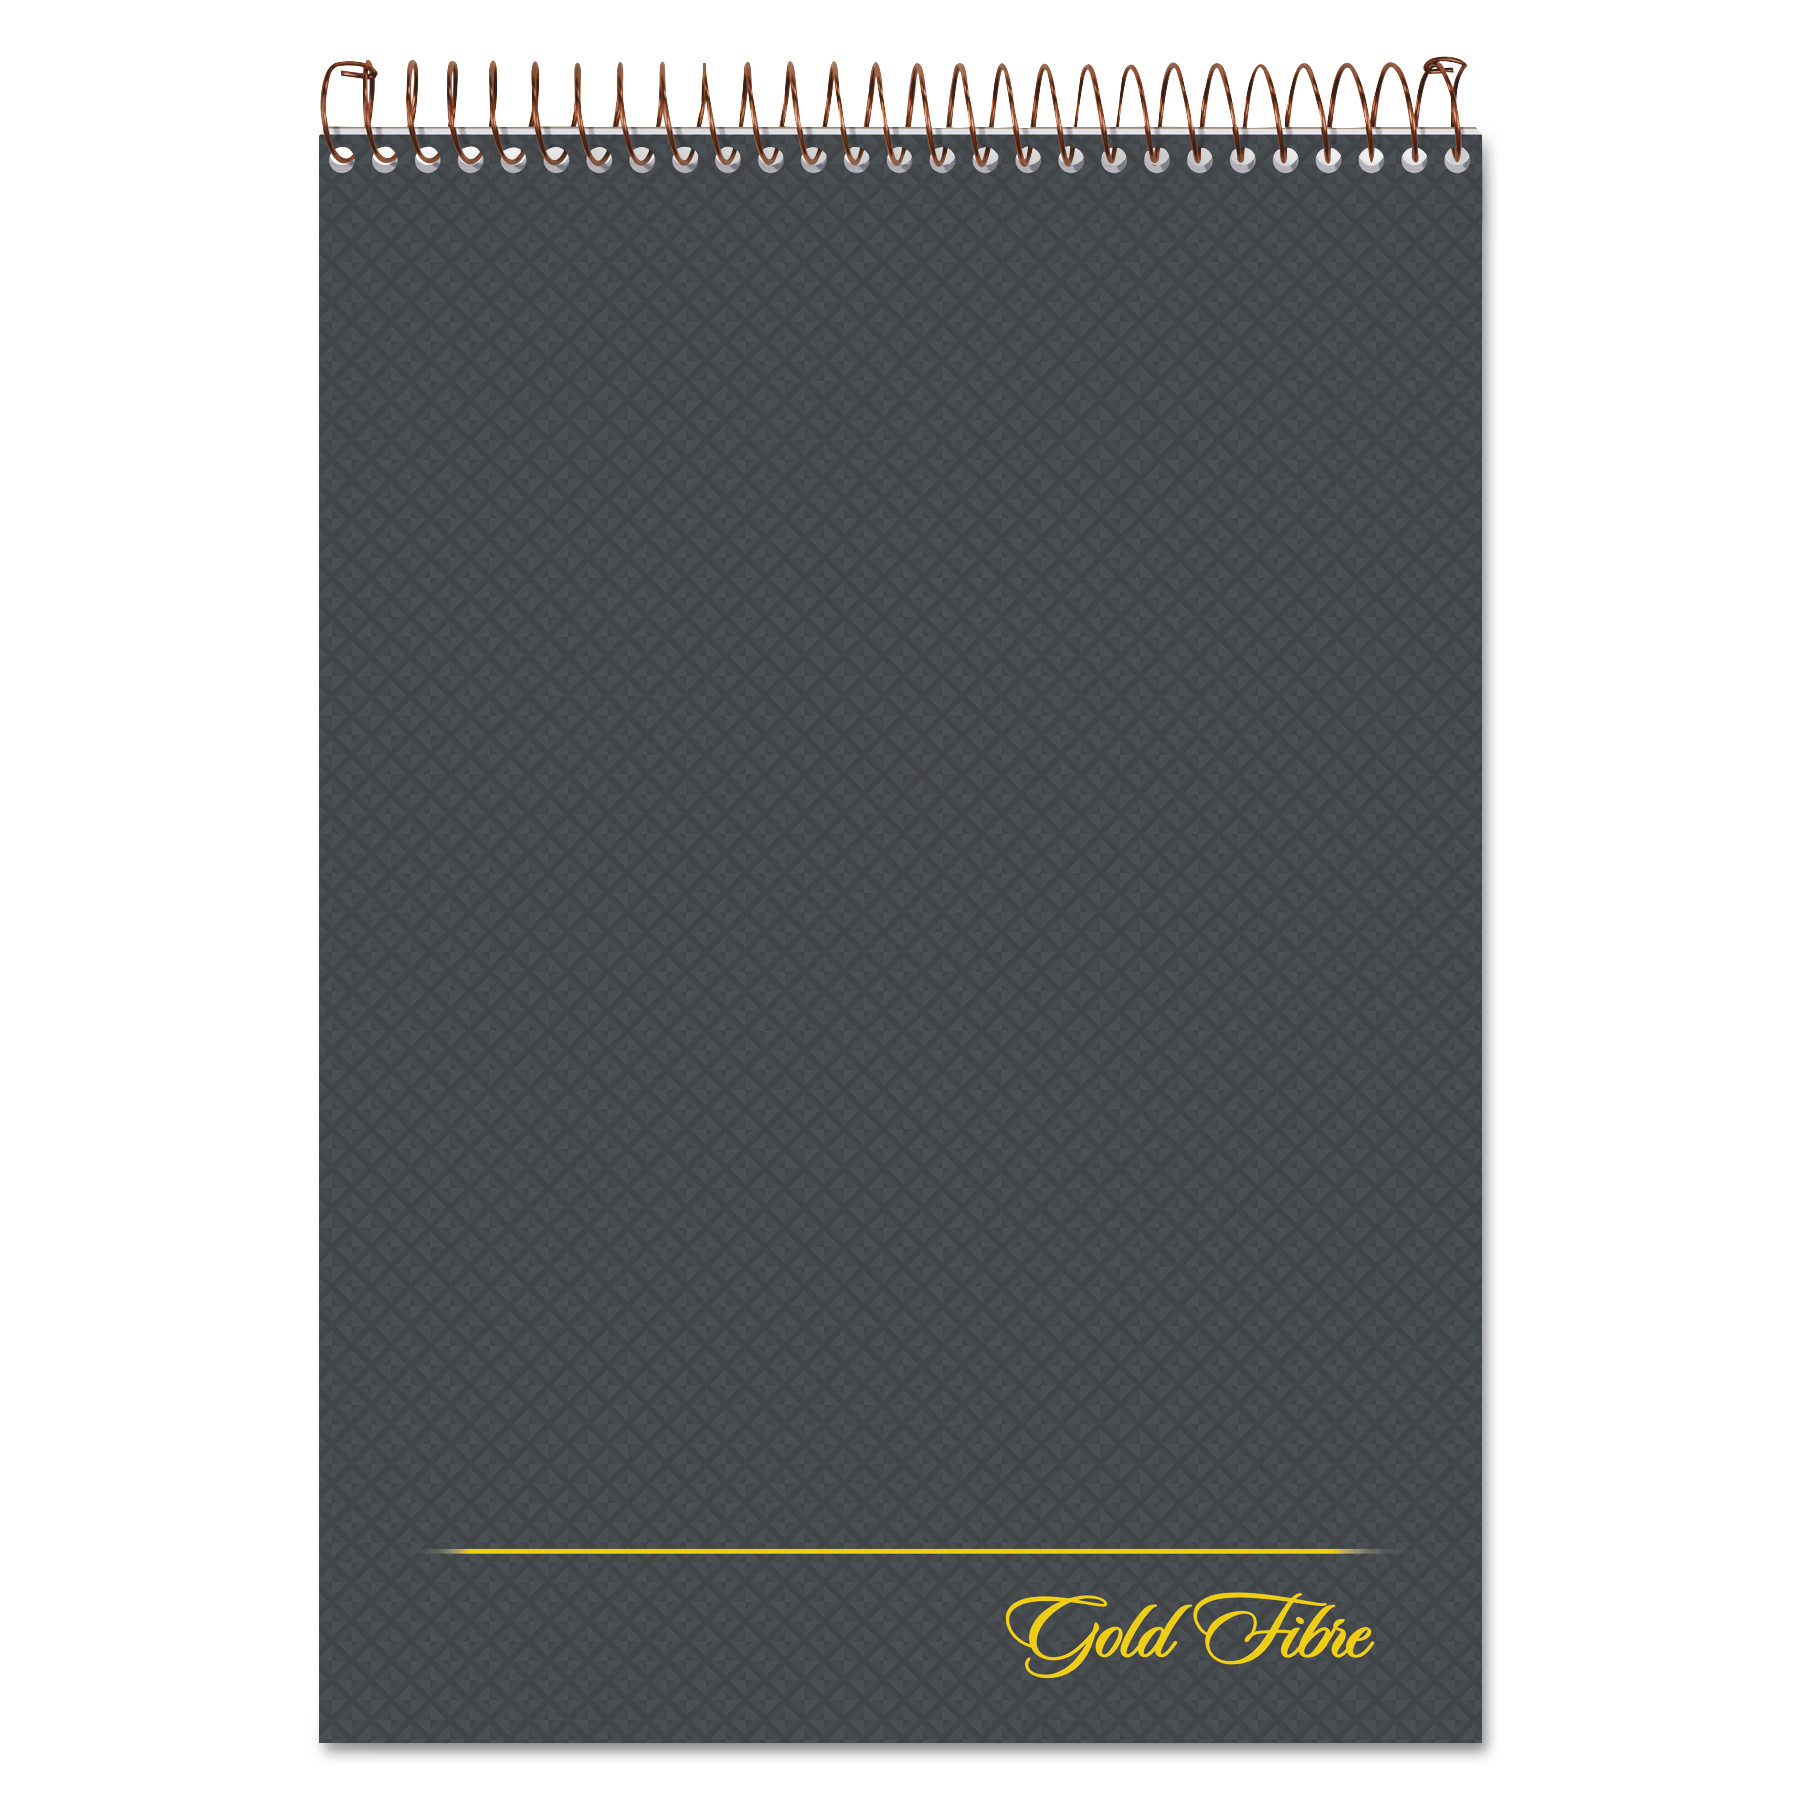  Ampad 20-813 Gold Fibre Wirebound Writing Pad w/ Cover, 1 Subject, Project Notes, Gray Cover, 8.5 x 11.75, 70 Sheets (TOP20813) 